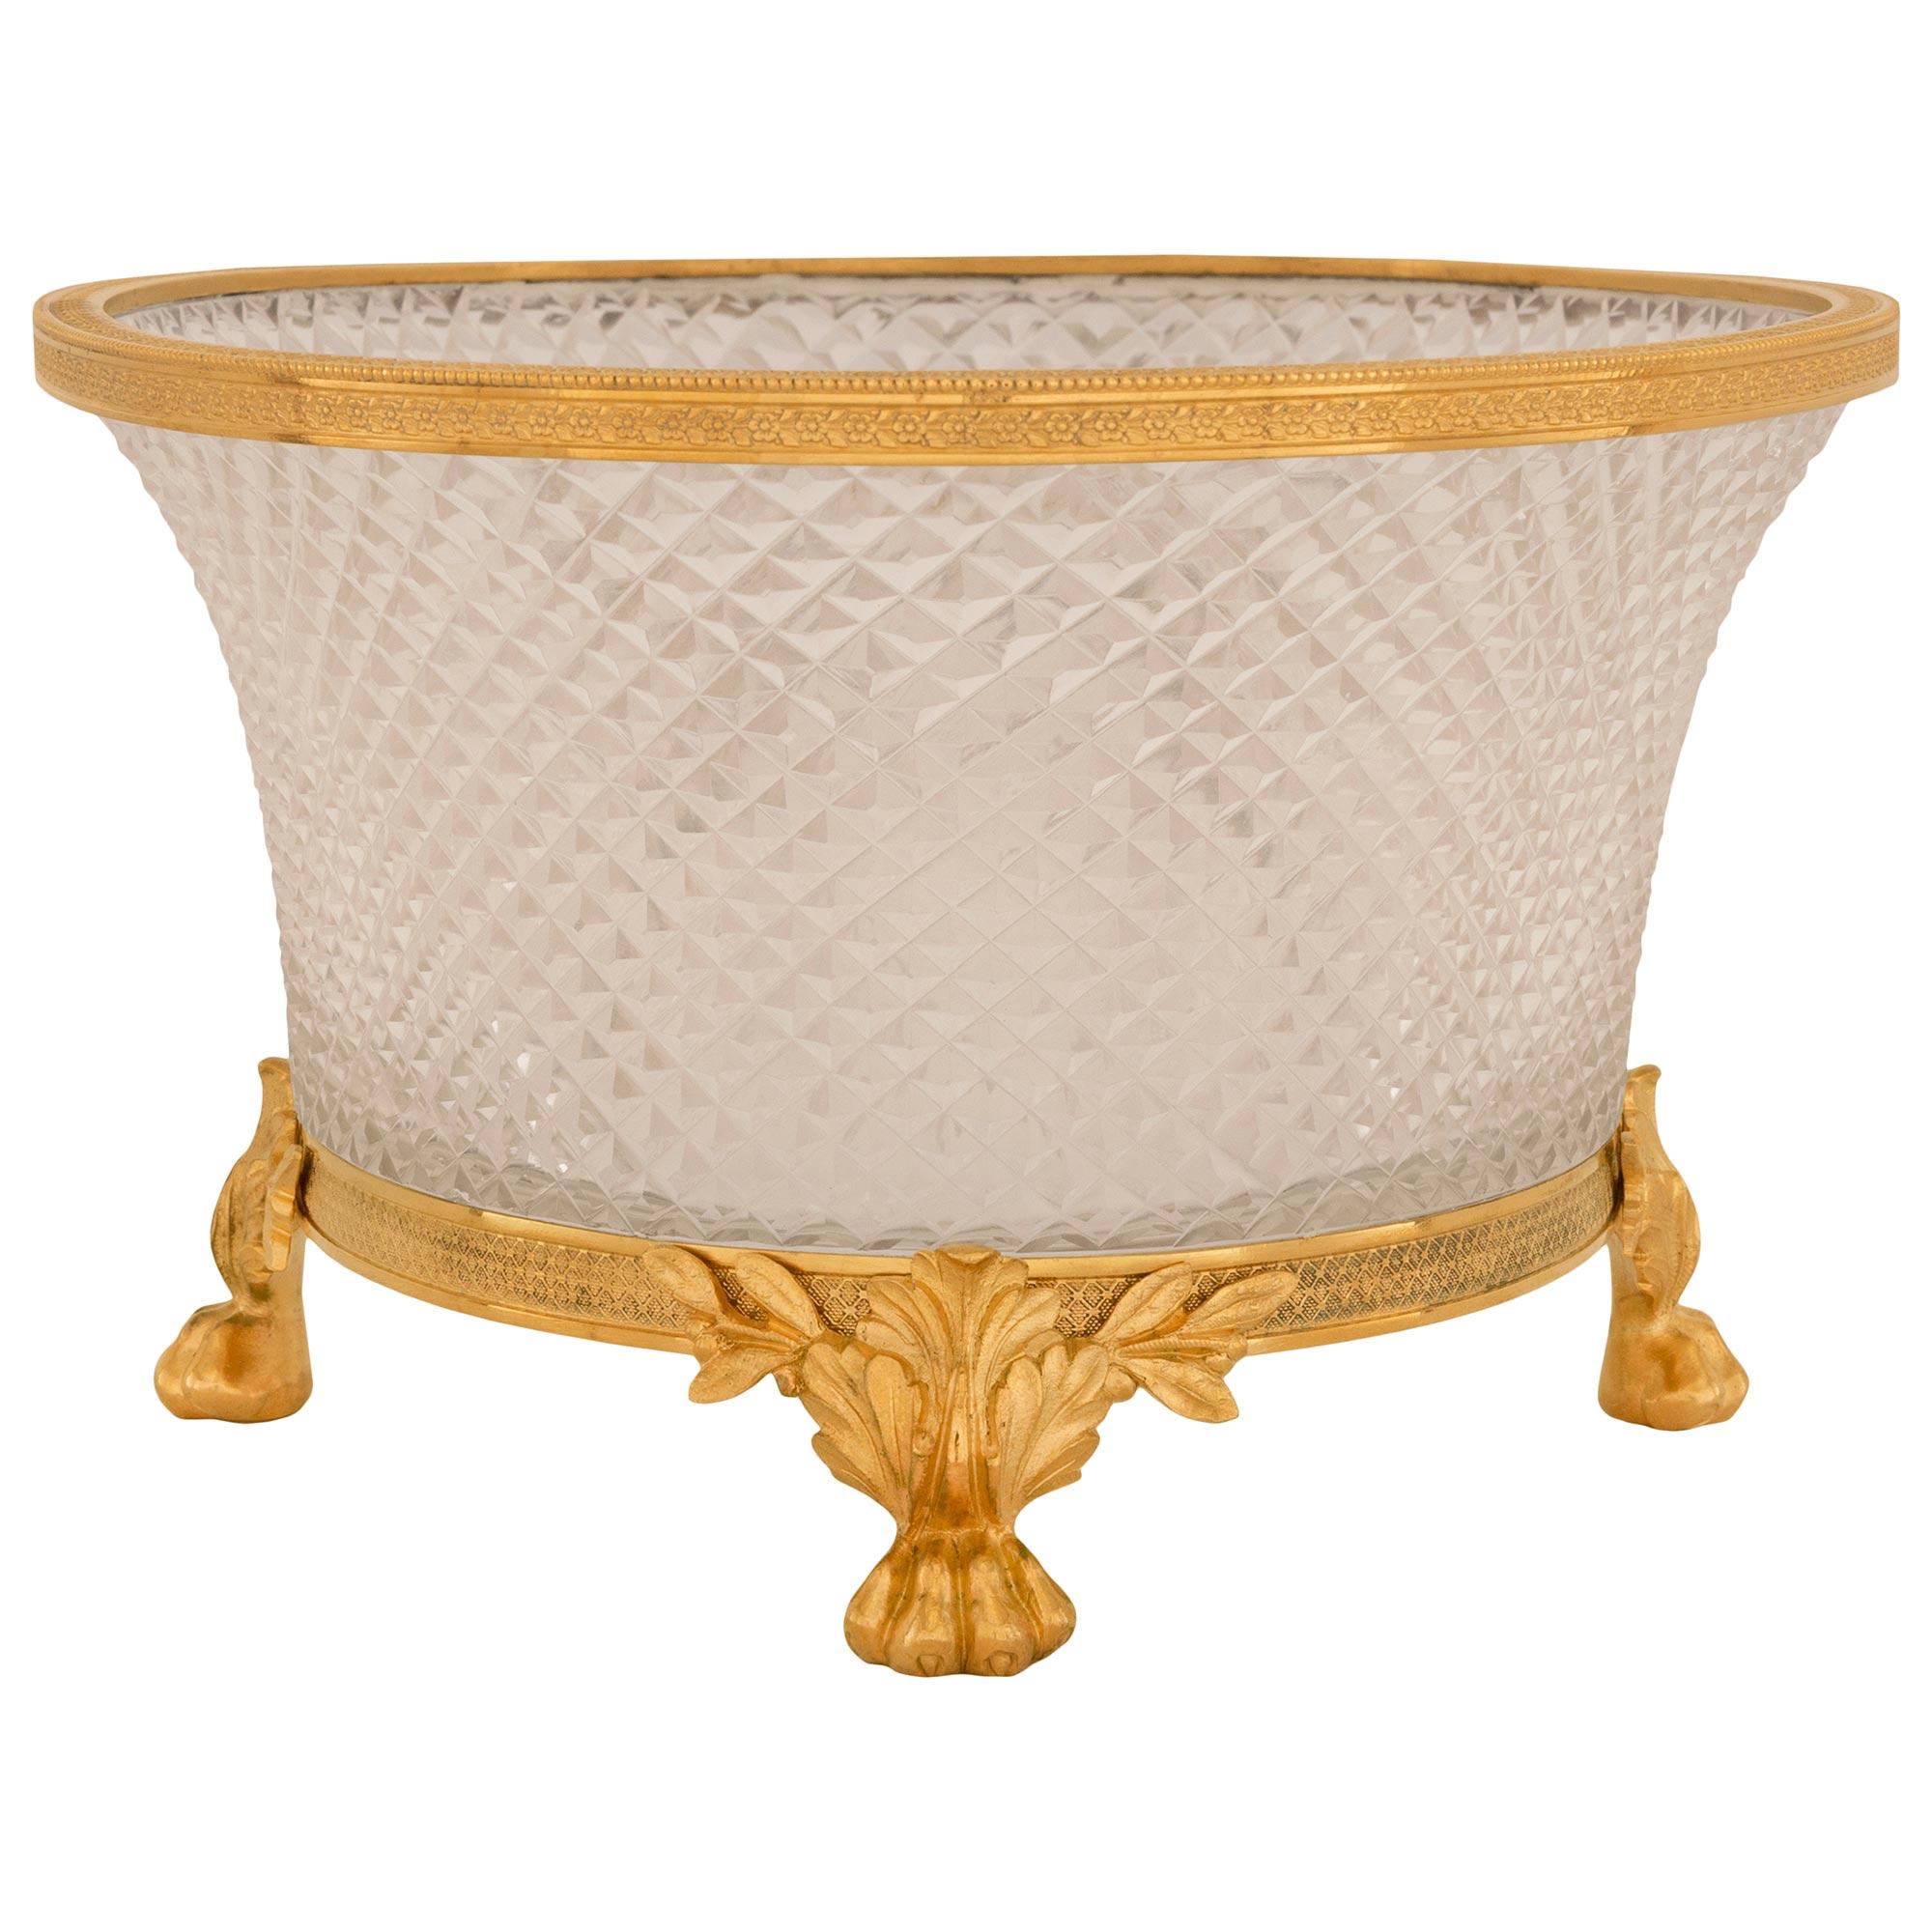 French 19th Century Belle Époque Period Baccarat Crystal and Ormolu Centerpiece For Sale 1